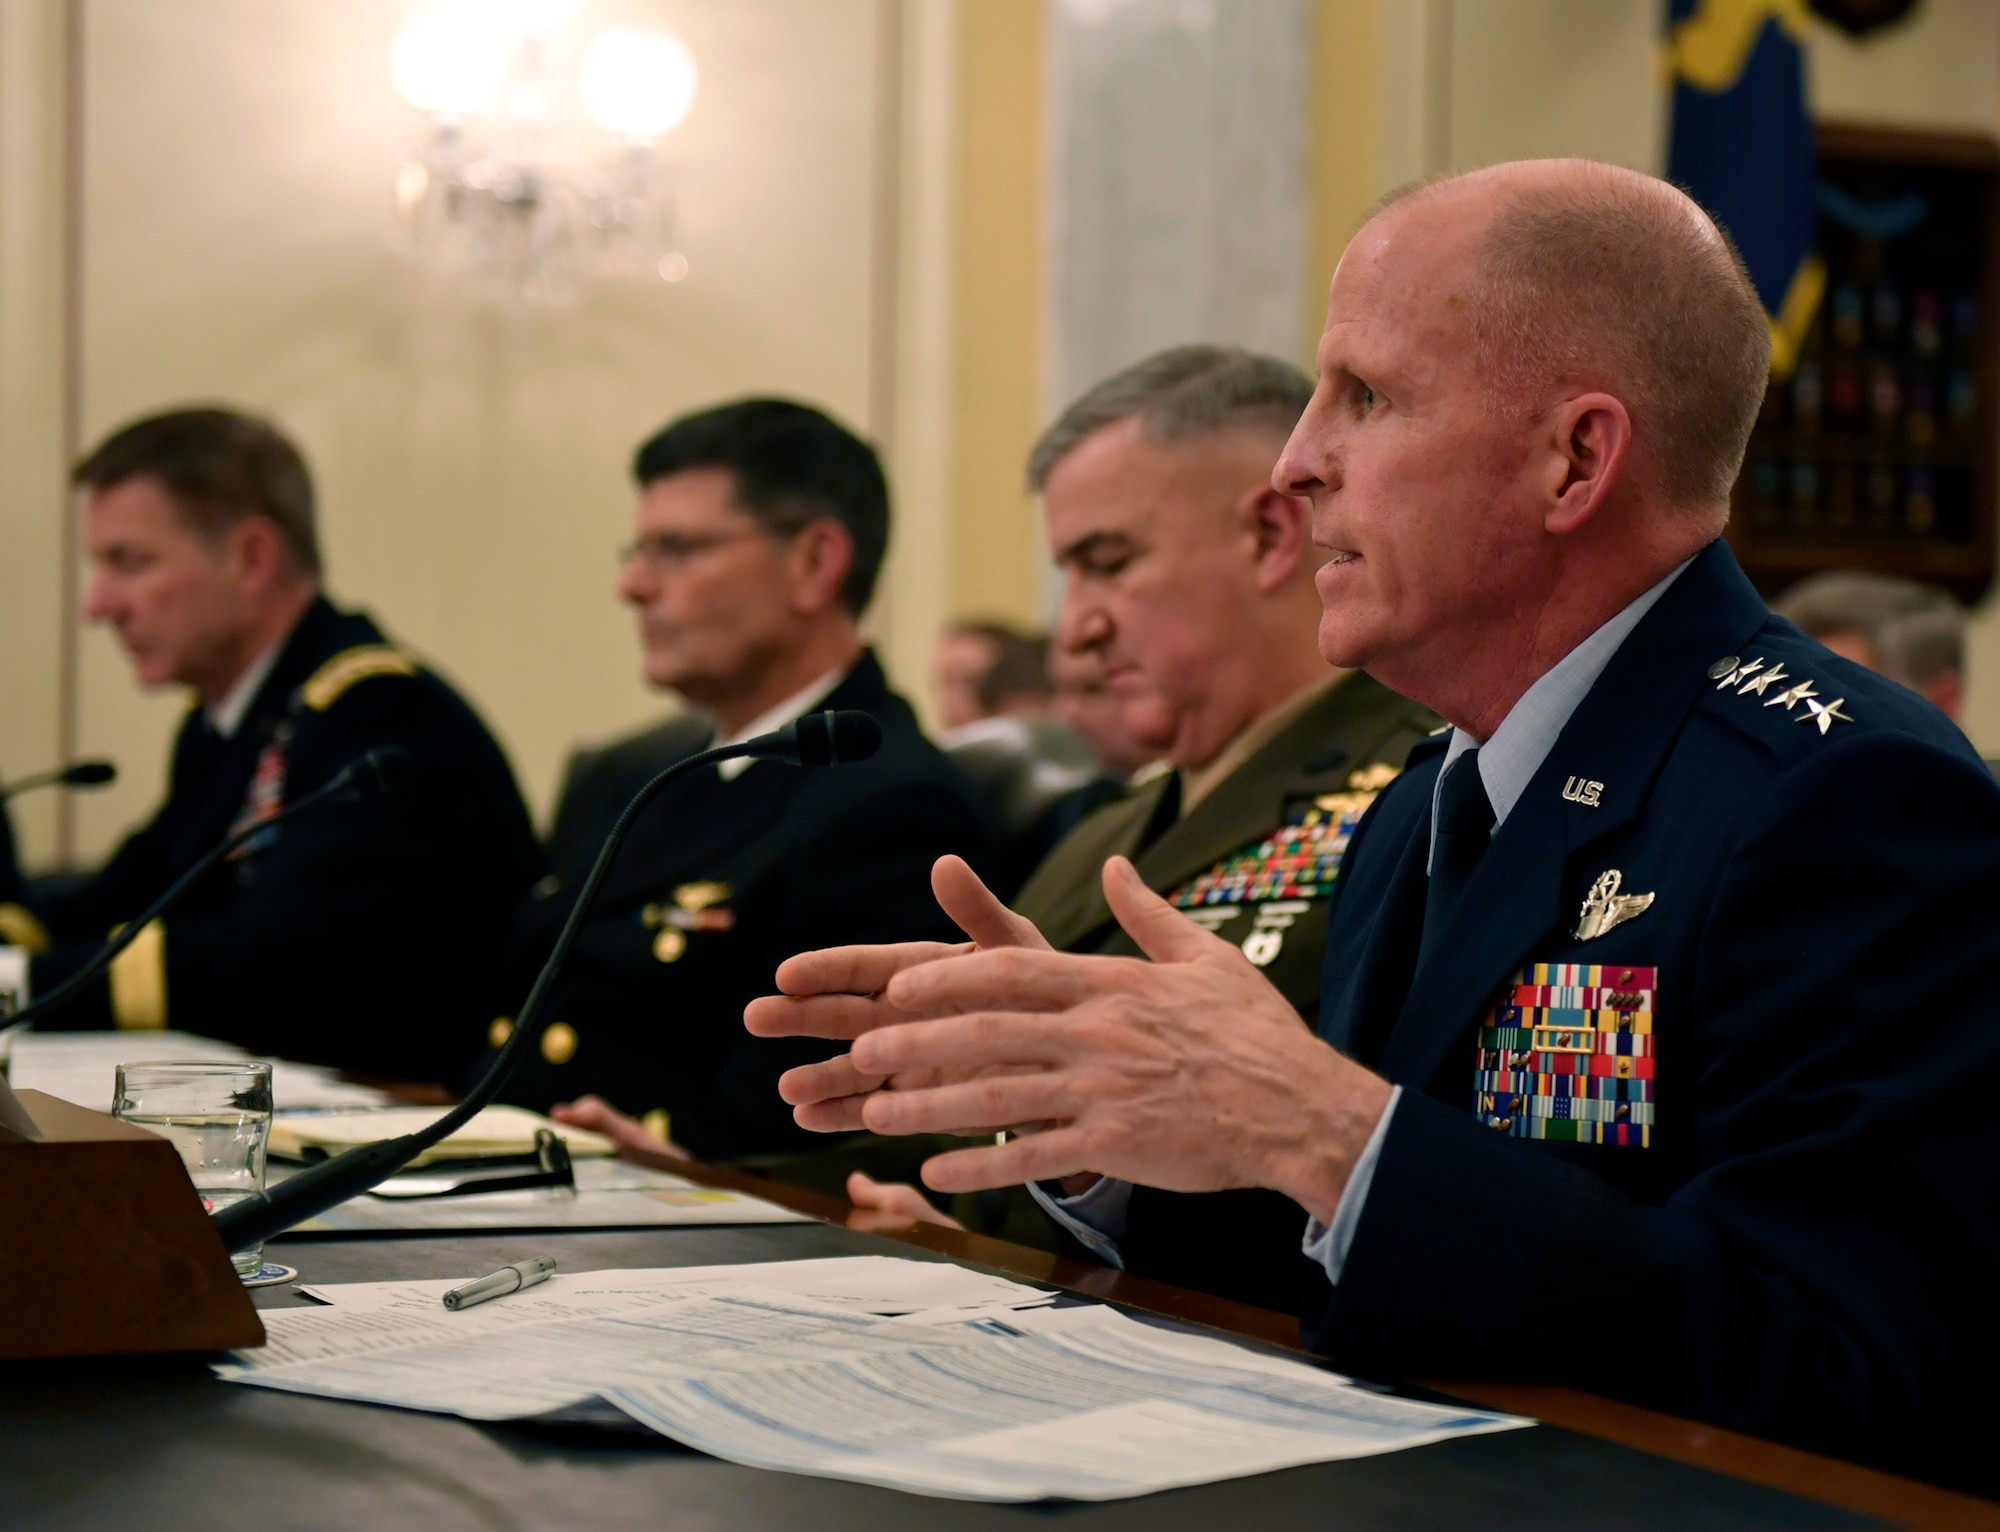 Air Force Vice Chief of Staff Gen. Stephen Wilson speaks to the Senate Armed Services Committee in Washington, D.C., Feb. 14, 2018.  Wilson and other members of the panel discussed the readiness of the Armed Forces. (U.S. Air Force photo by Wayne A. Clark)